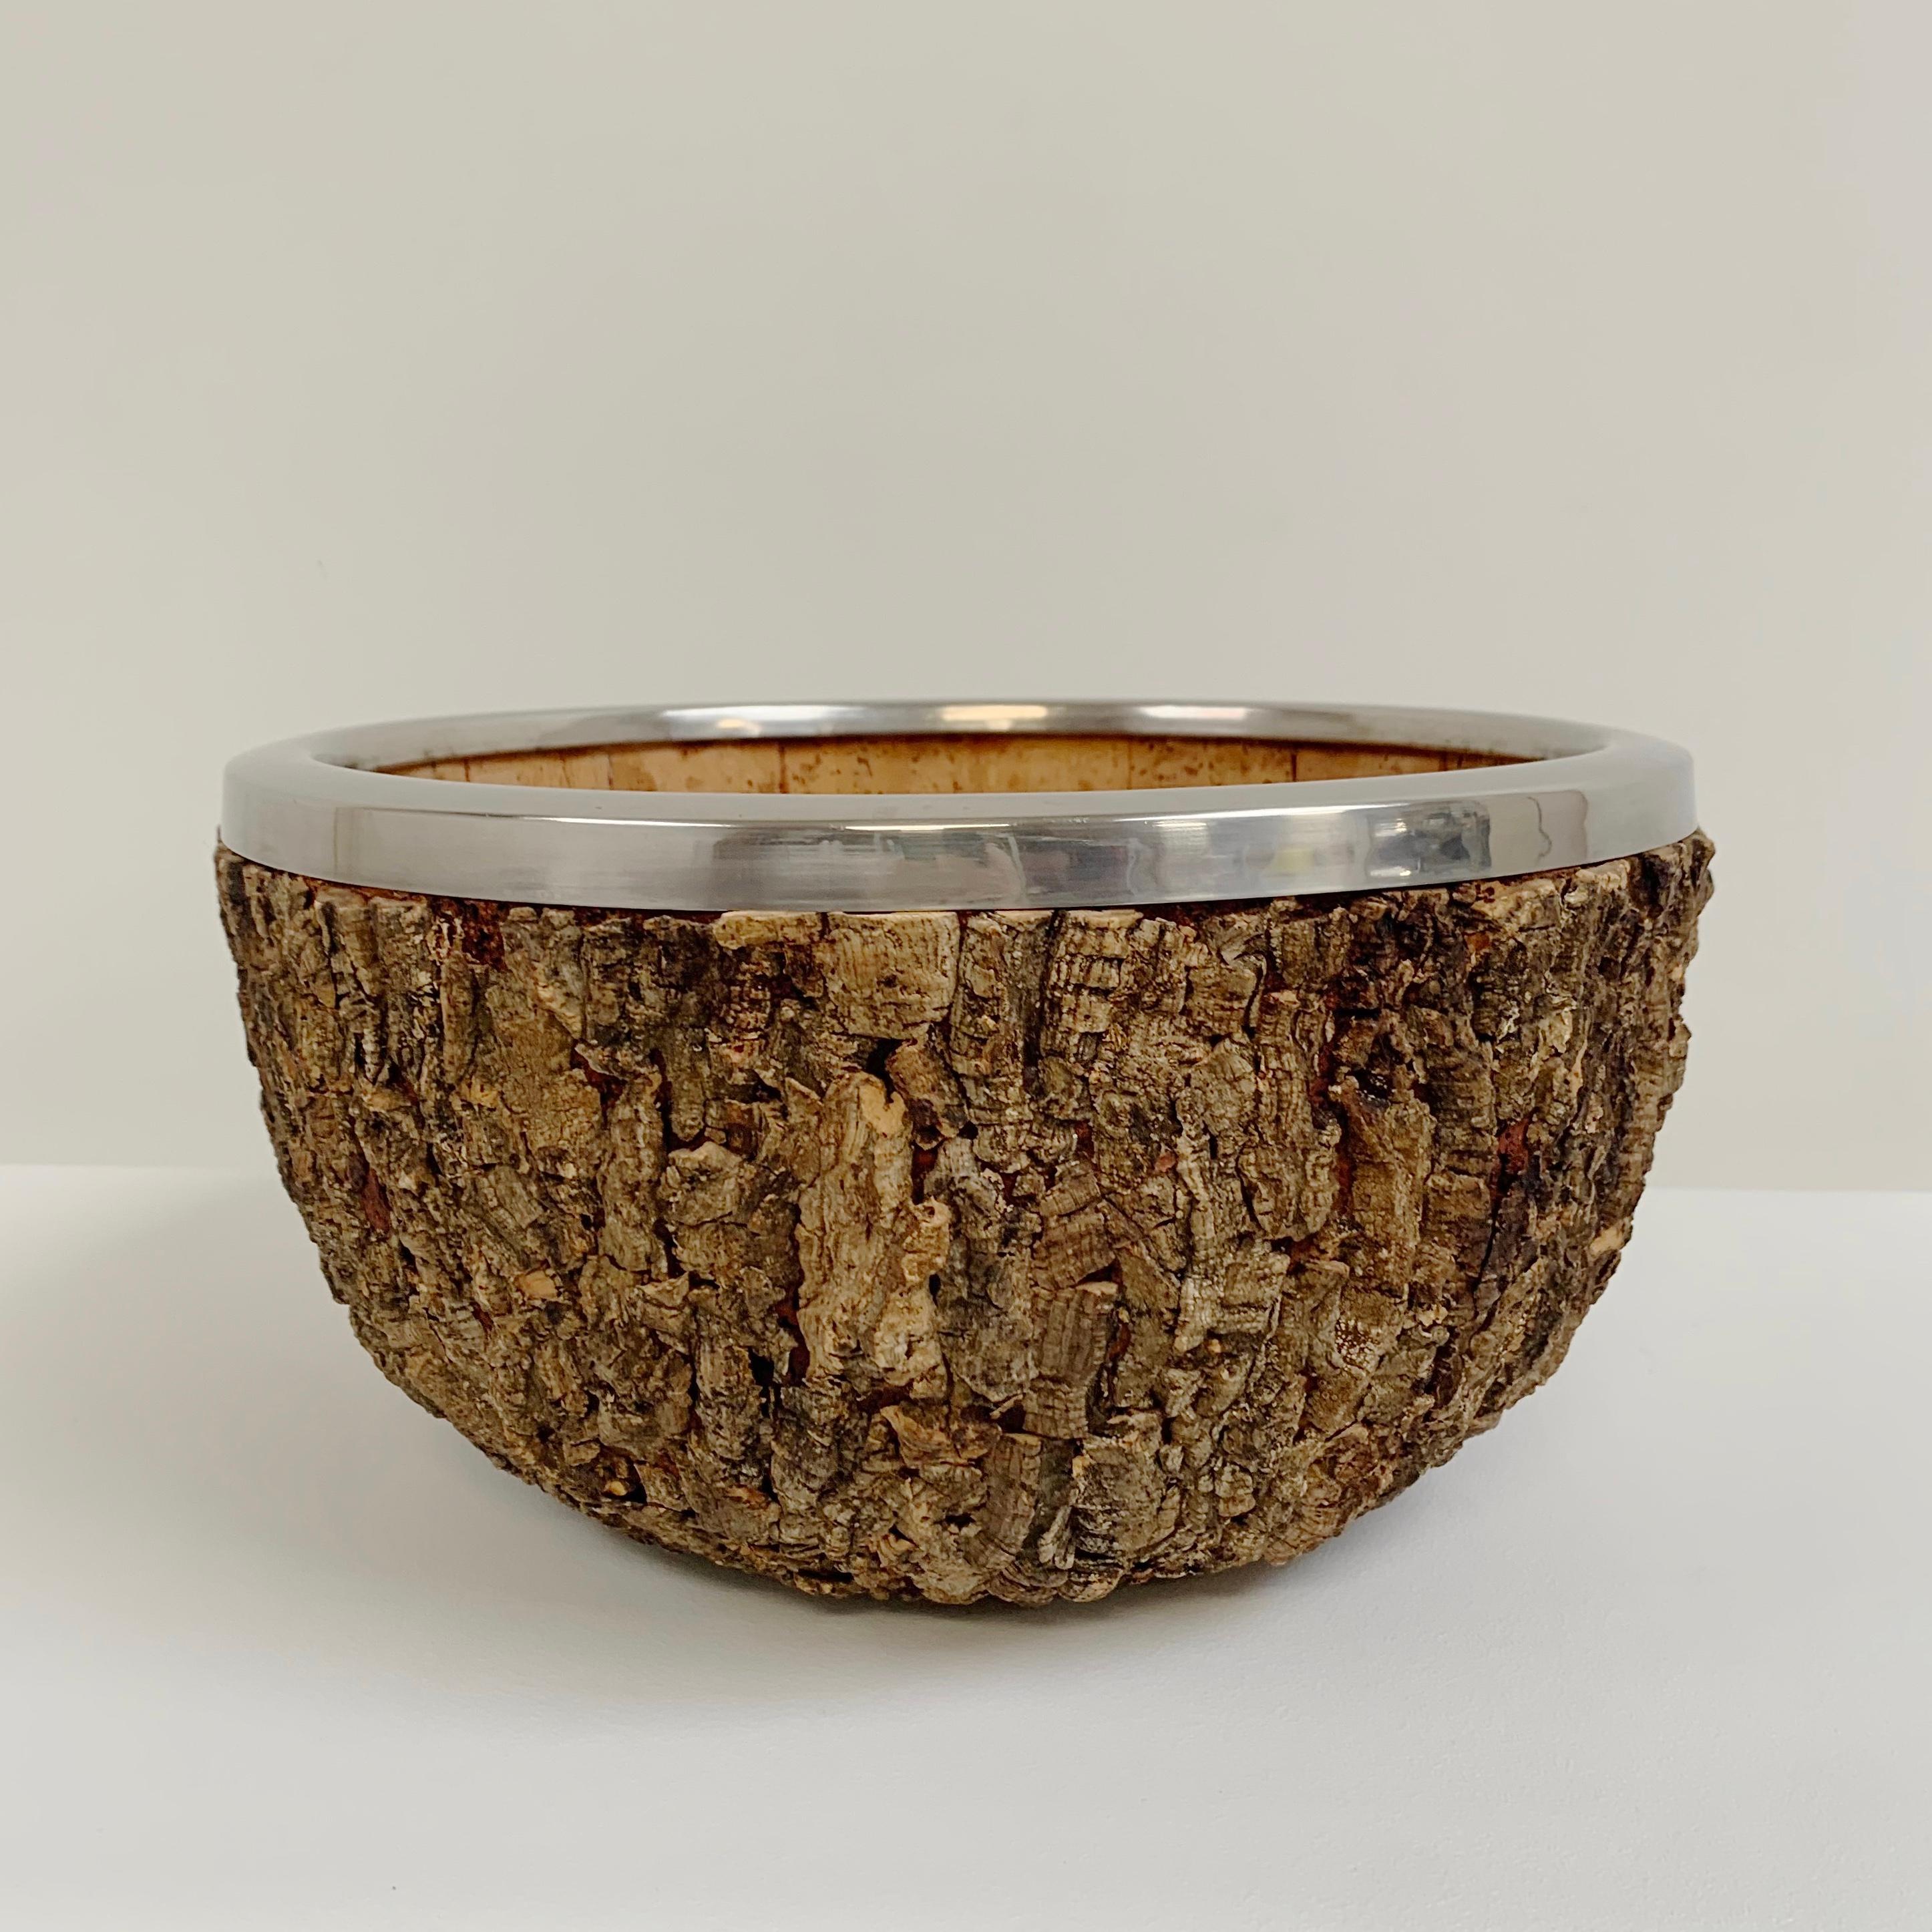 Late 20th Century Gabrielle Crespi Signed Large Cork Bowl, circa 1974, Italy.